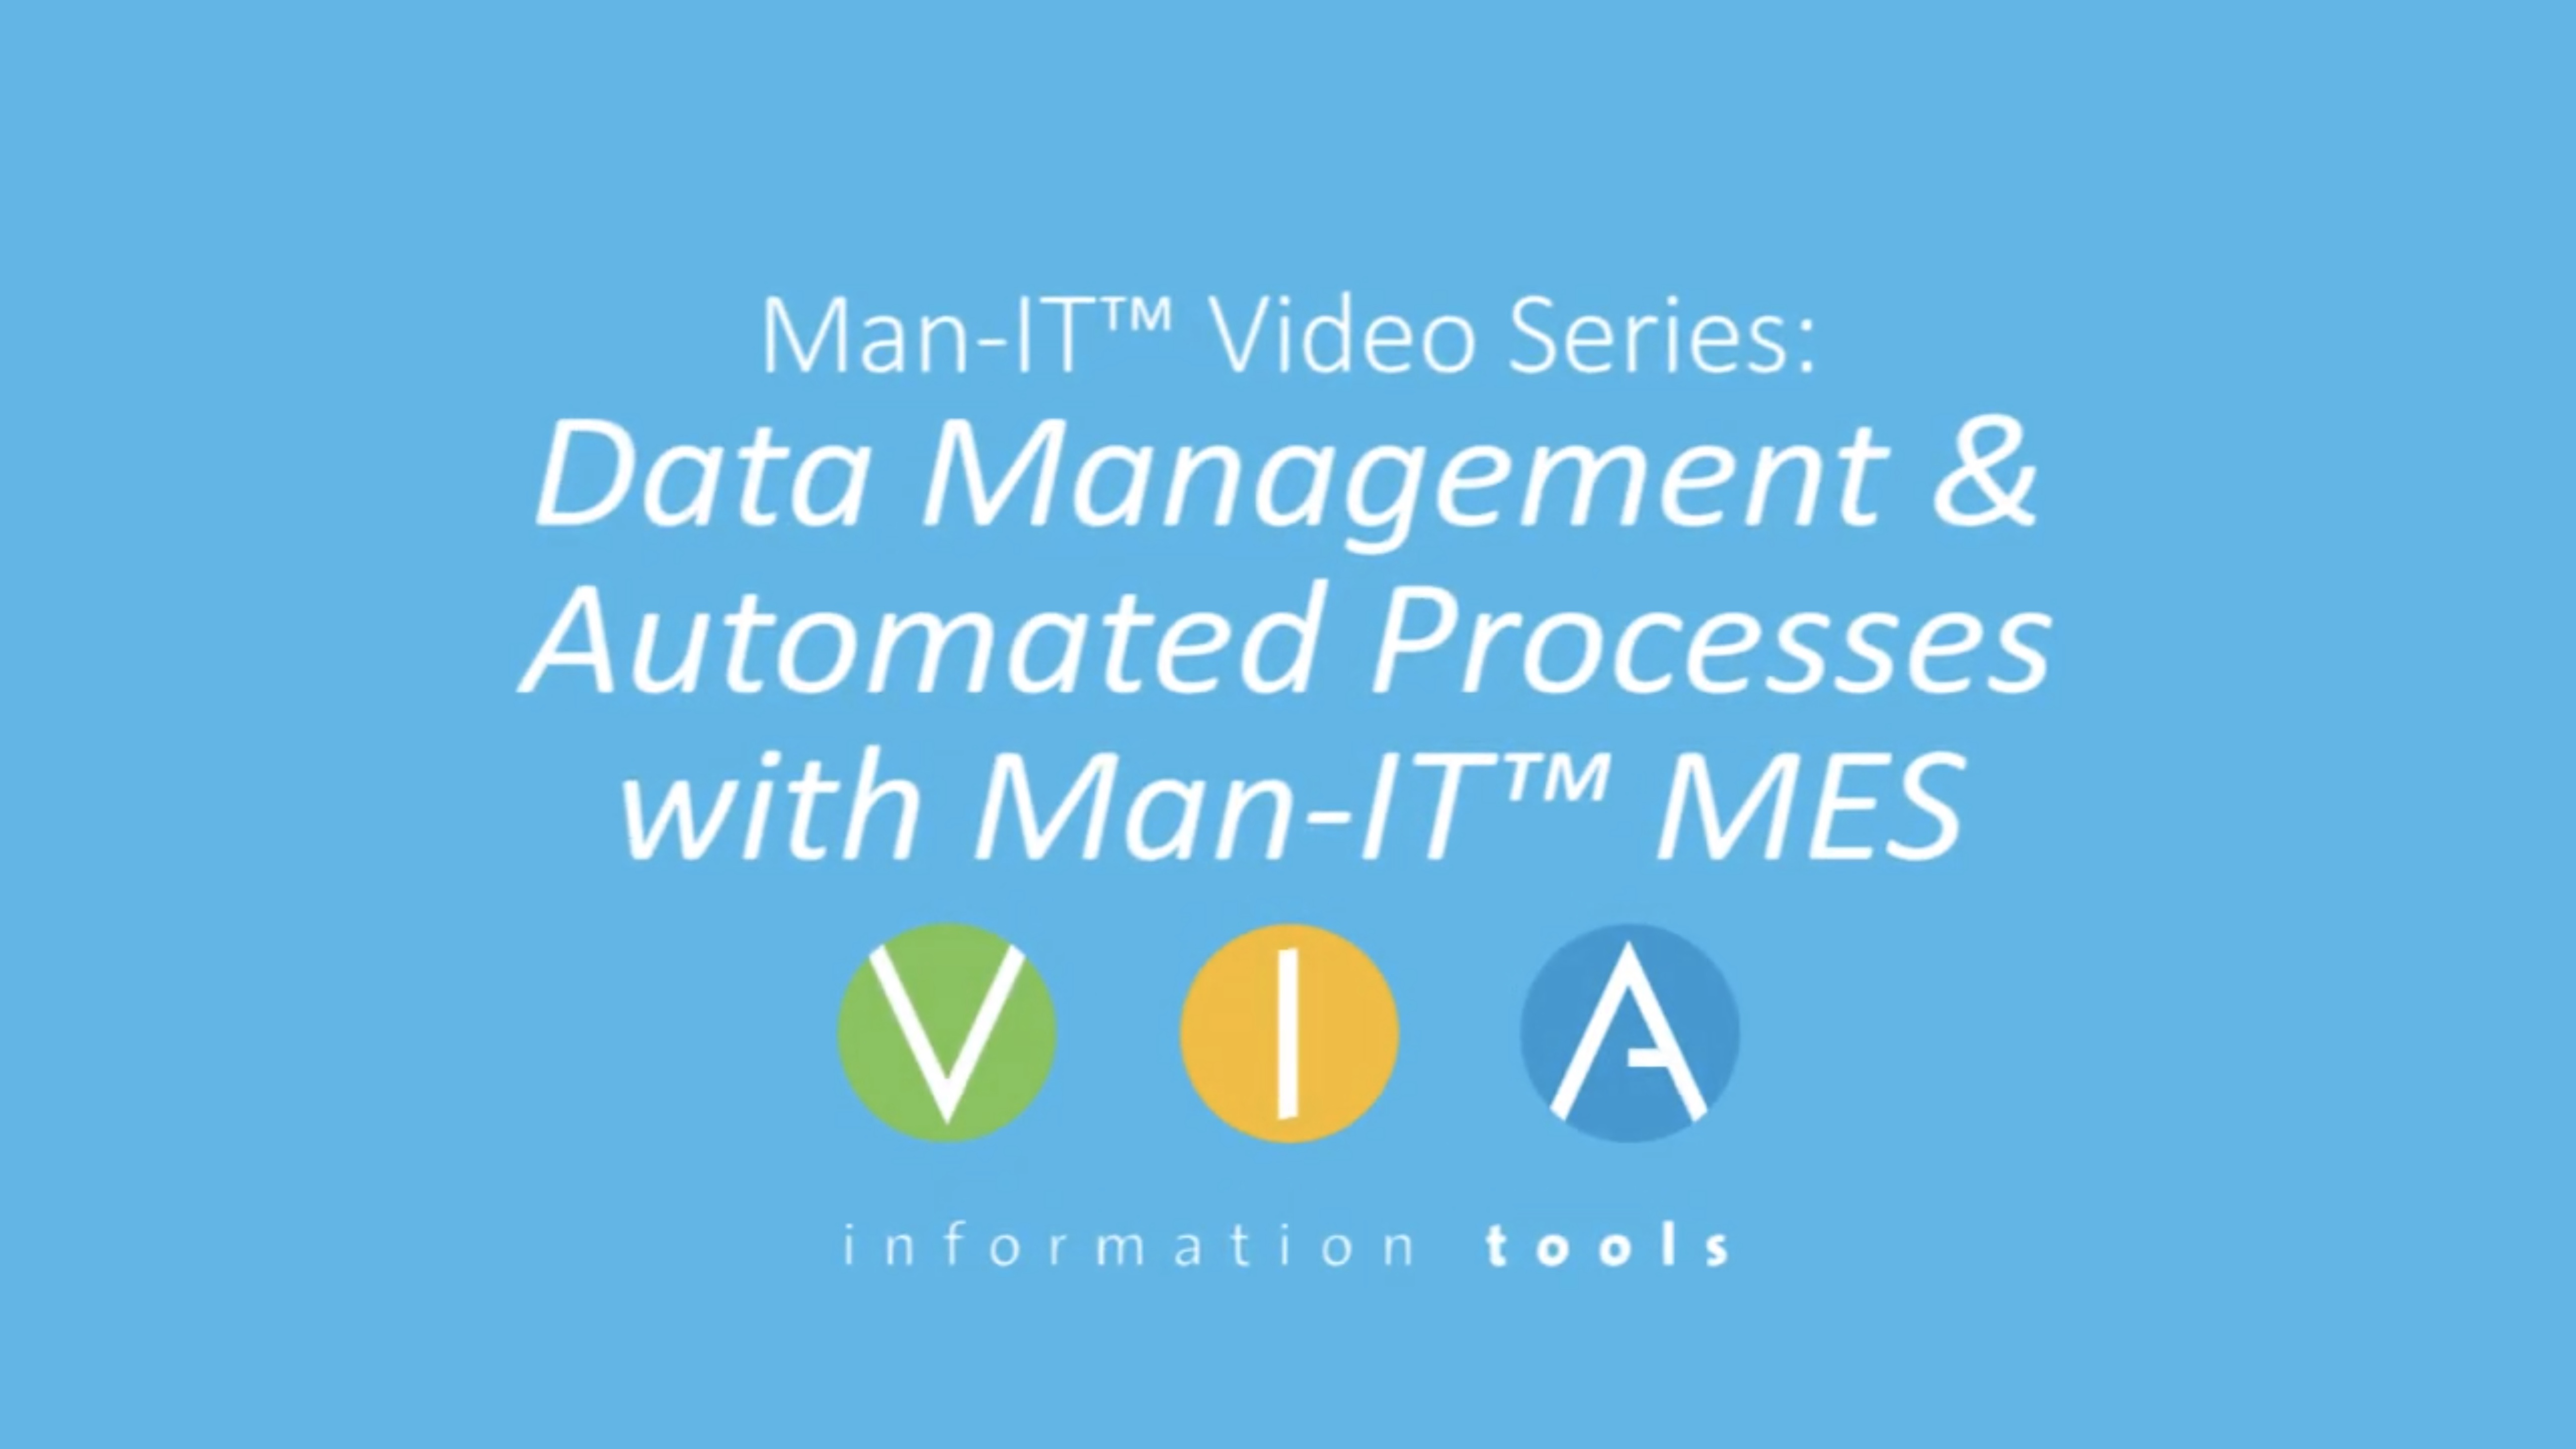 Video Series: Data Acquisition & Automated Processes with Man-IT™ MES